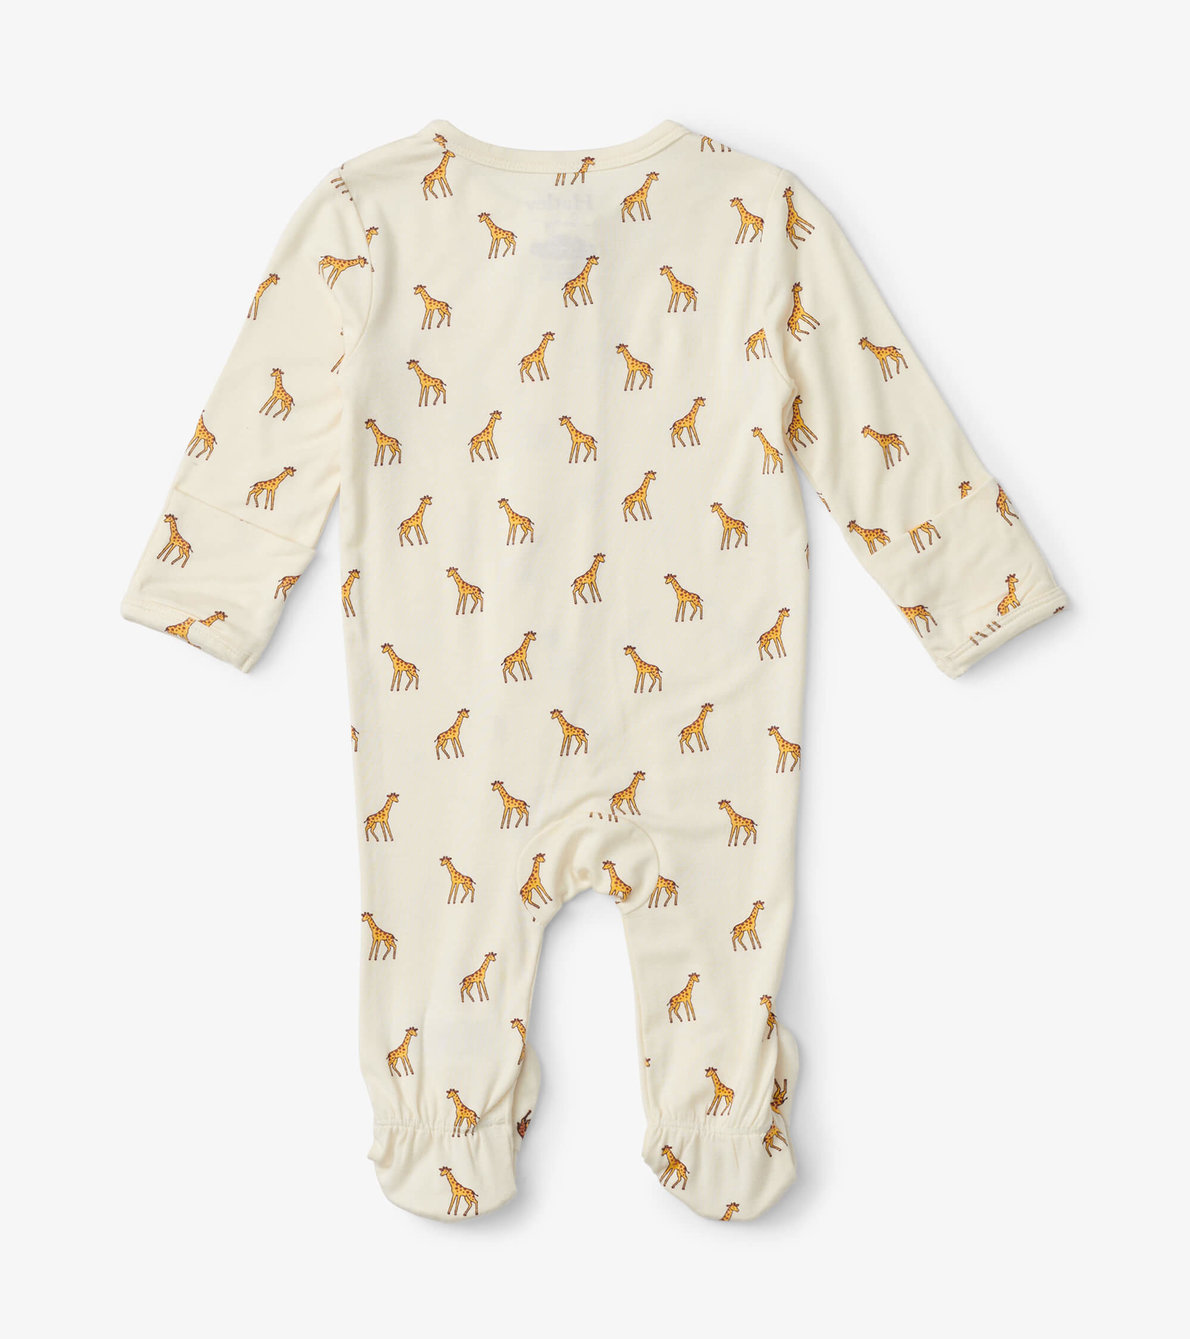 View larger image of Little Giraffes Baby Footed Sleeper